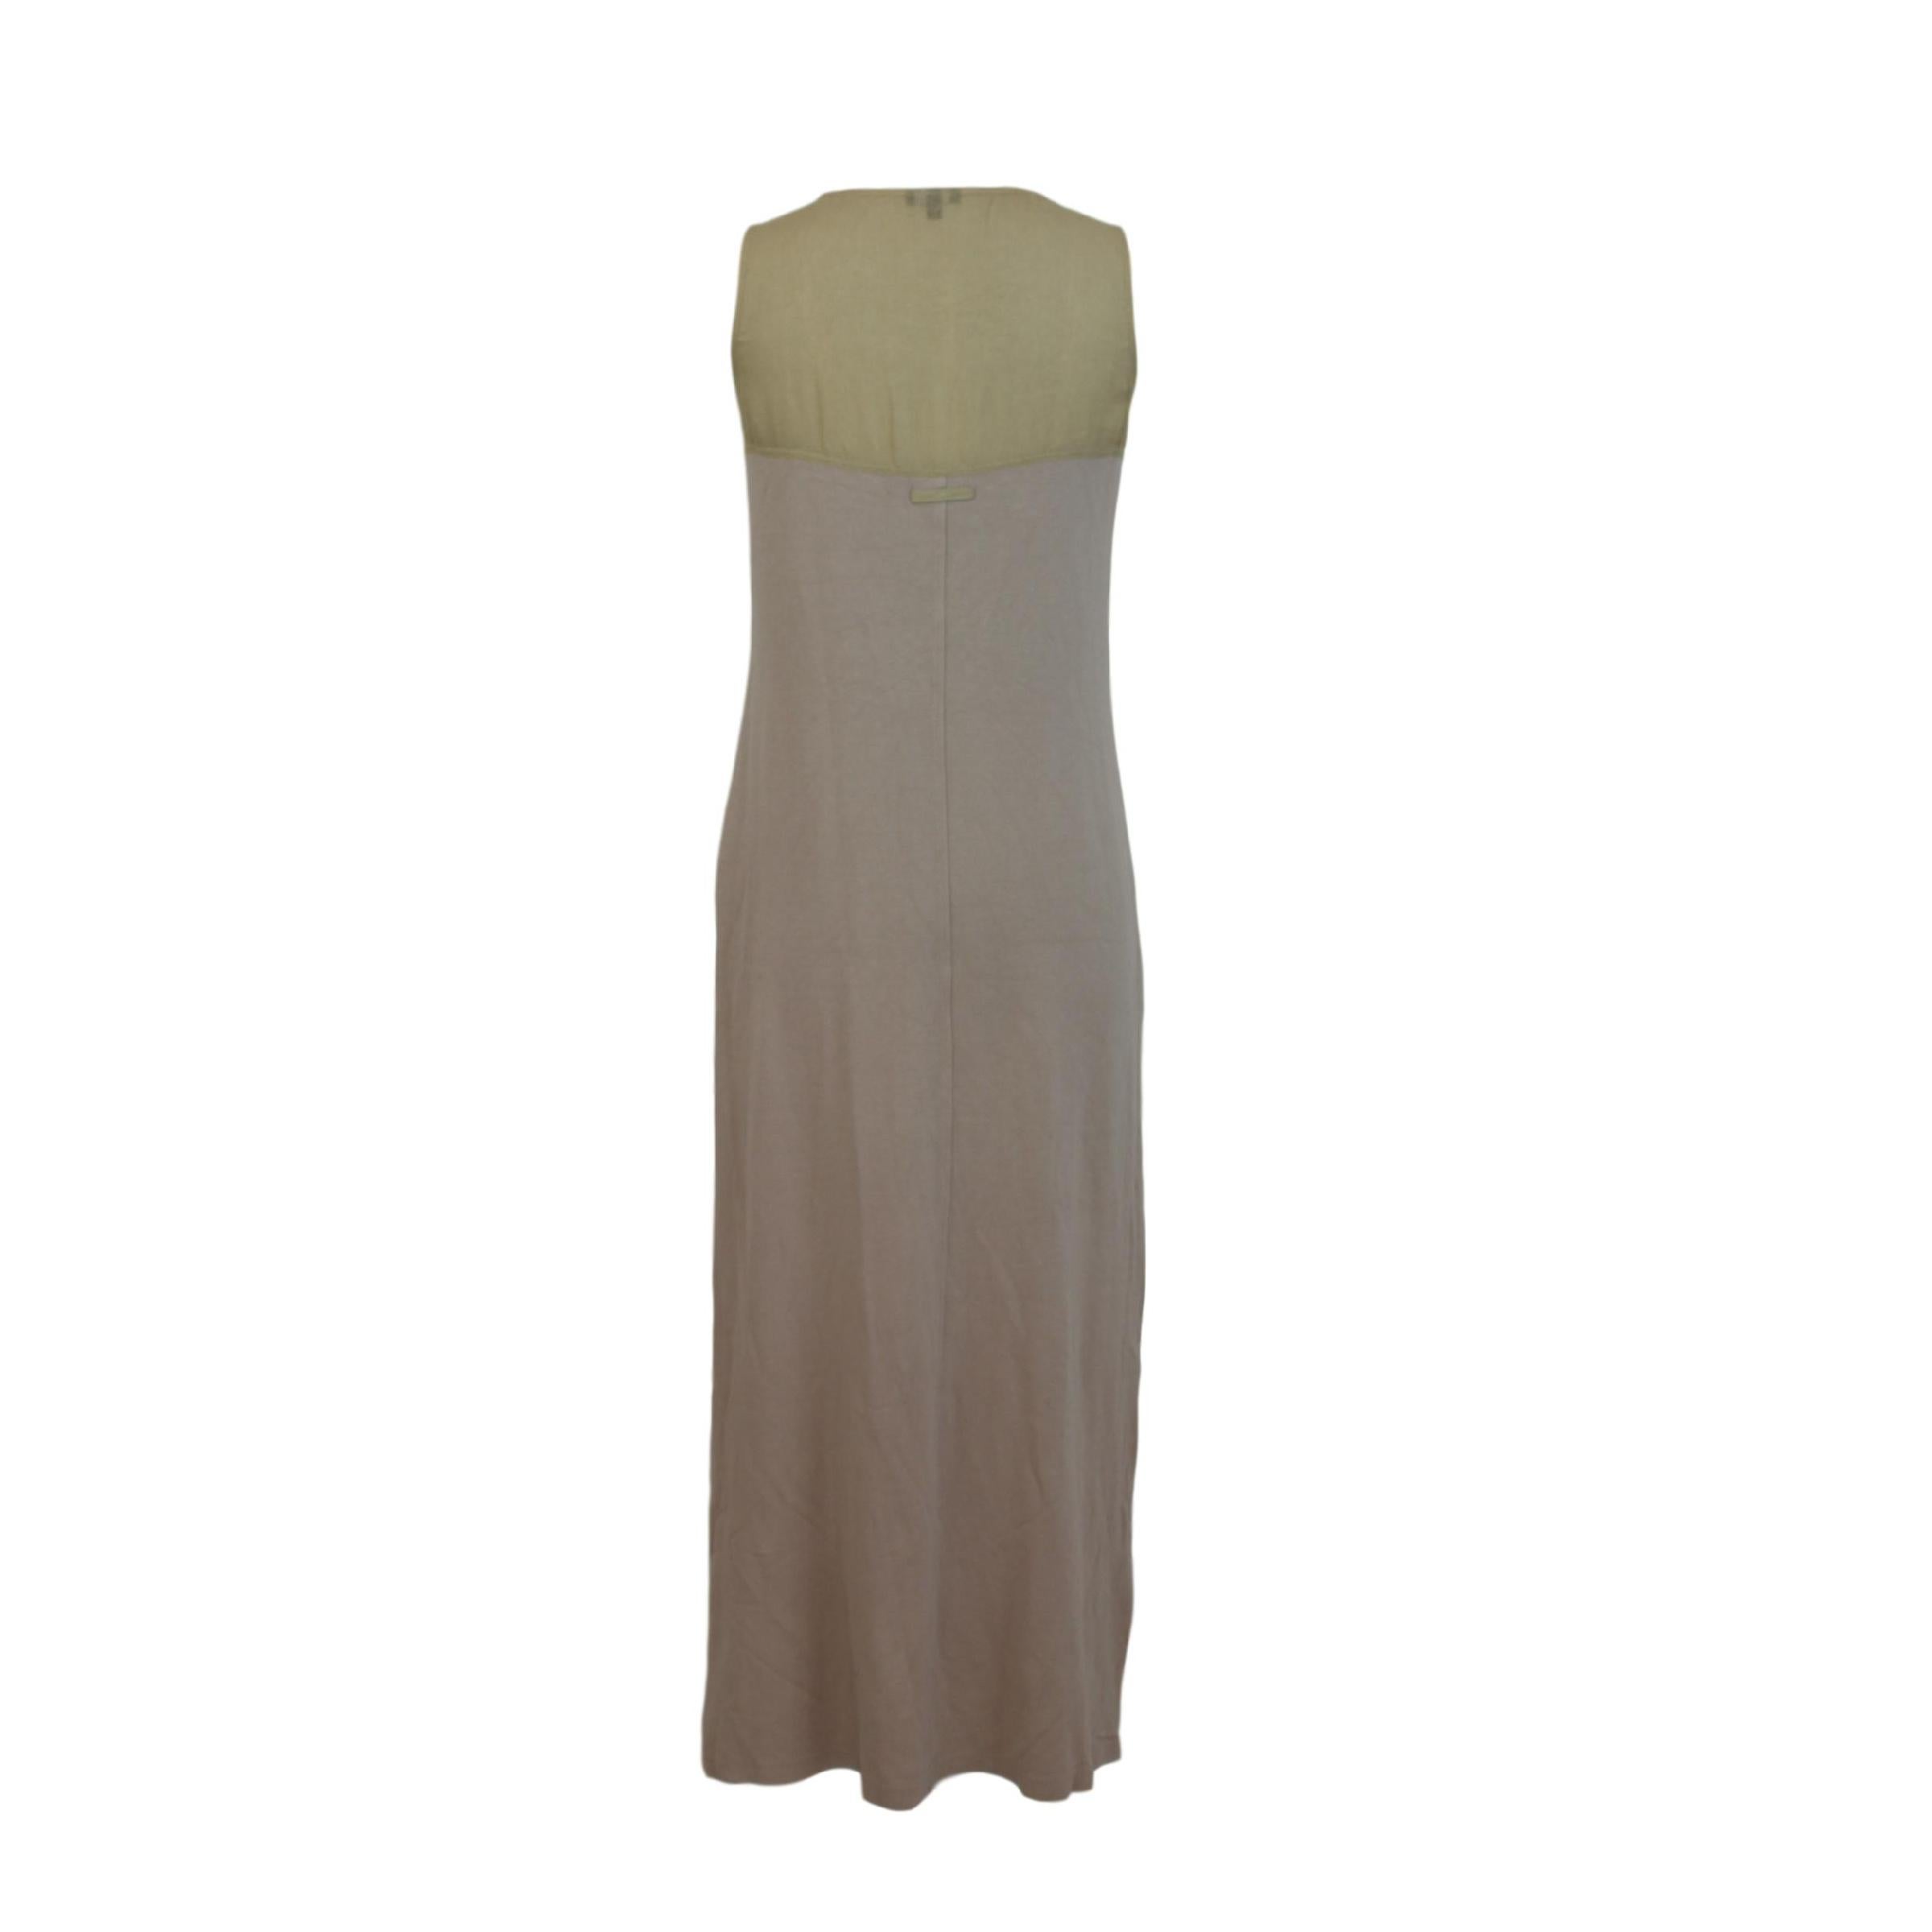 Trussardi long dress. Beige color, 100% cotton. Sleeveless dress, total length, on the chest transparent fabric, round neck. Made in Italy. Good vintage conditions.

Size 42 It 8 Us 10 Uk

Shoulders: 42 cm
Chest / bust: 44 cm
Sleeves: no
Length: 133